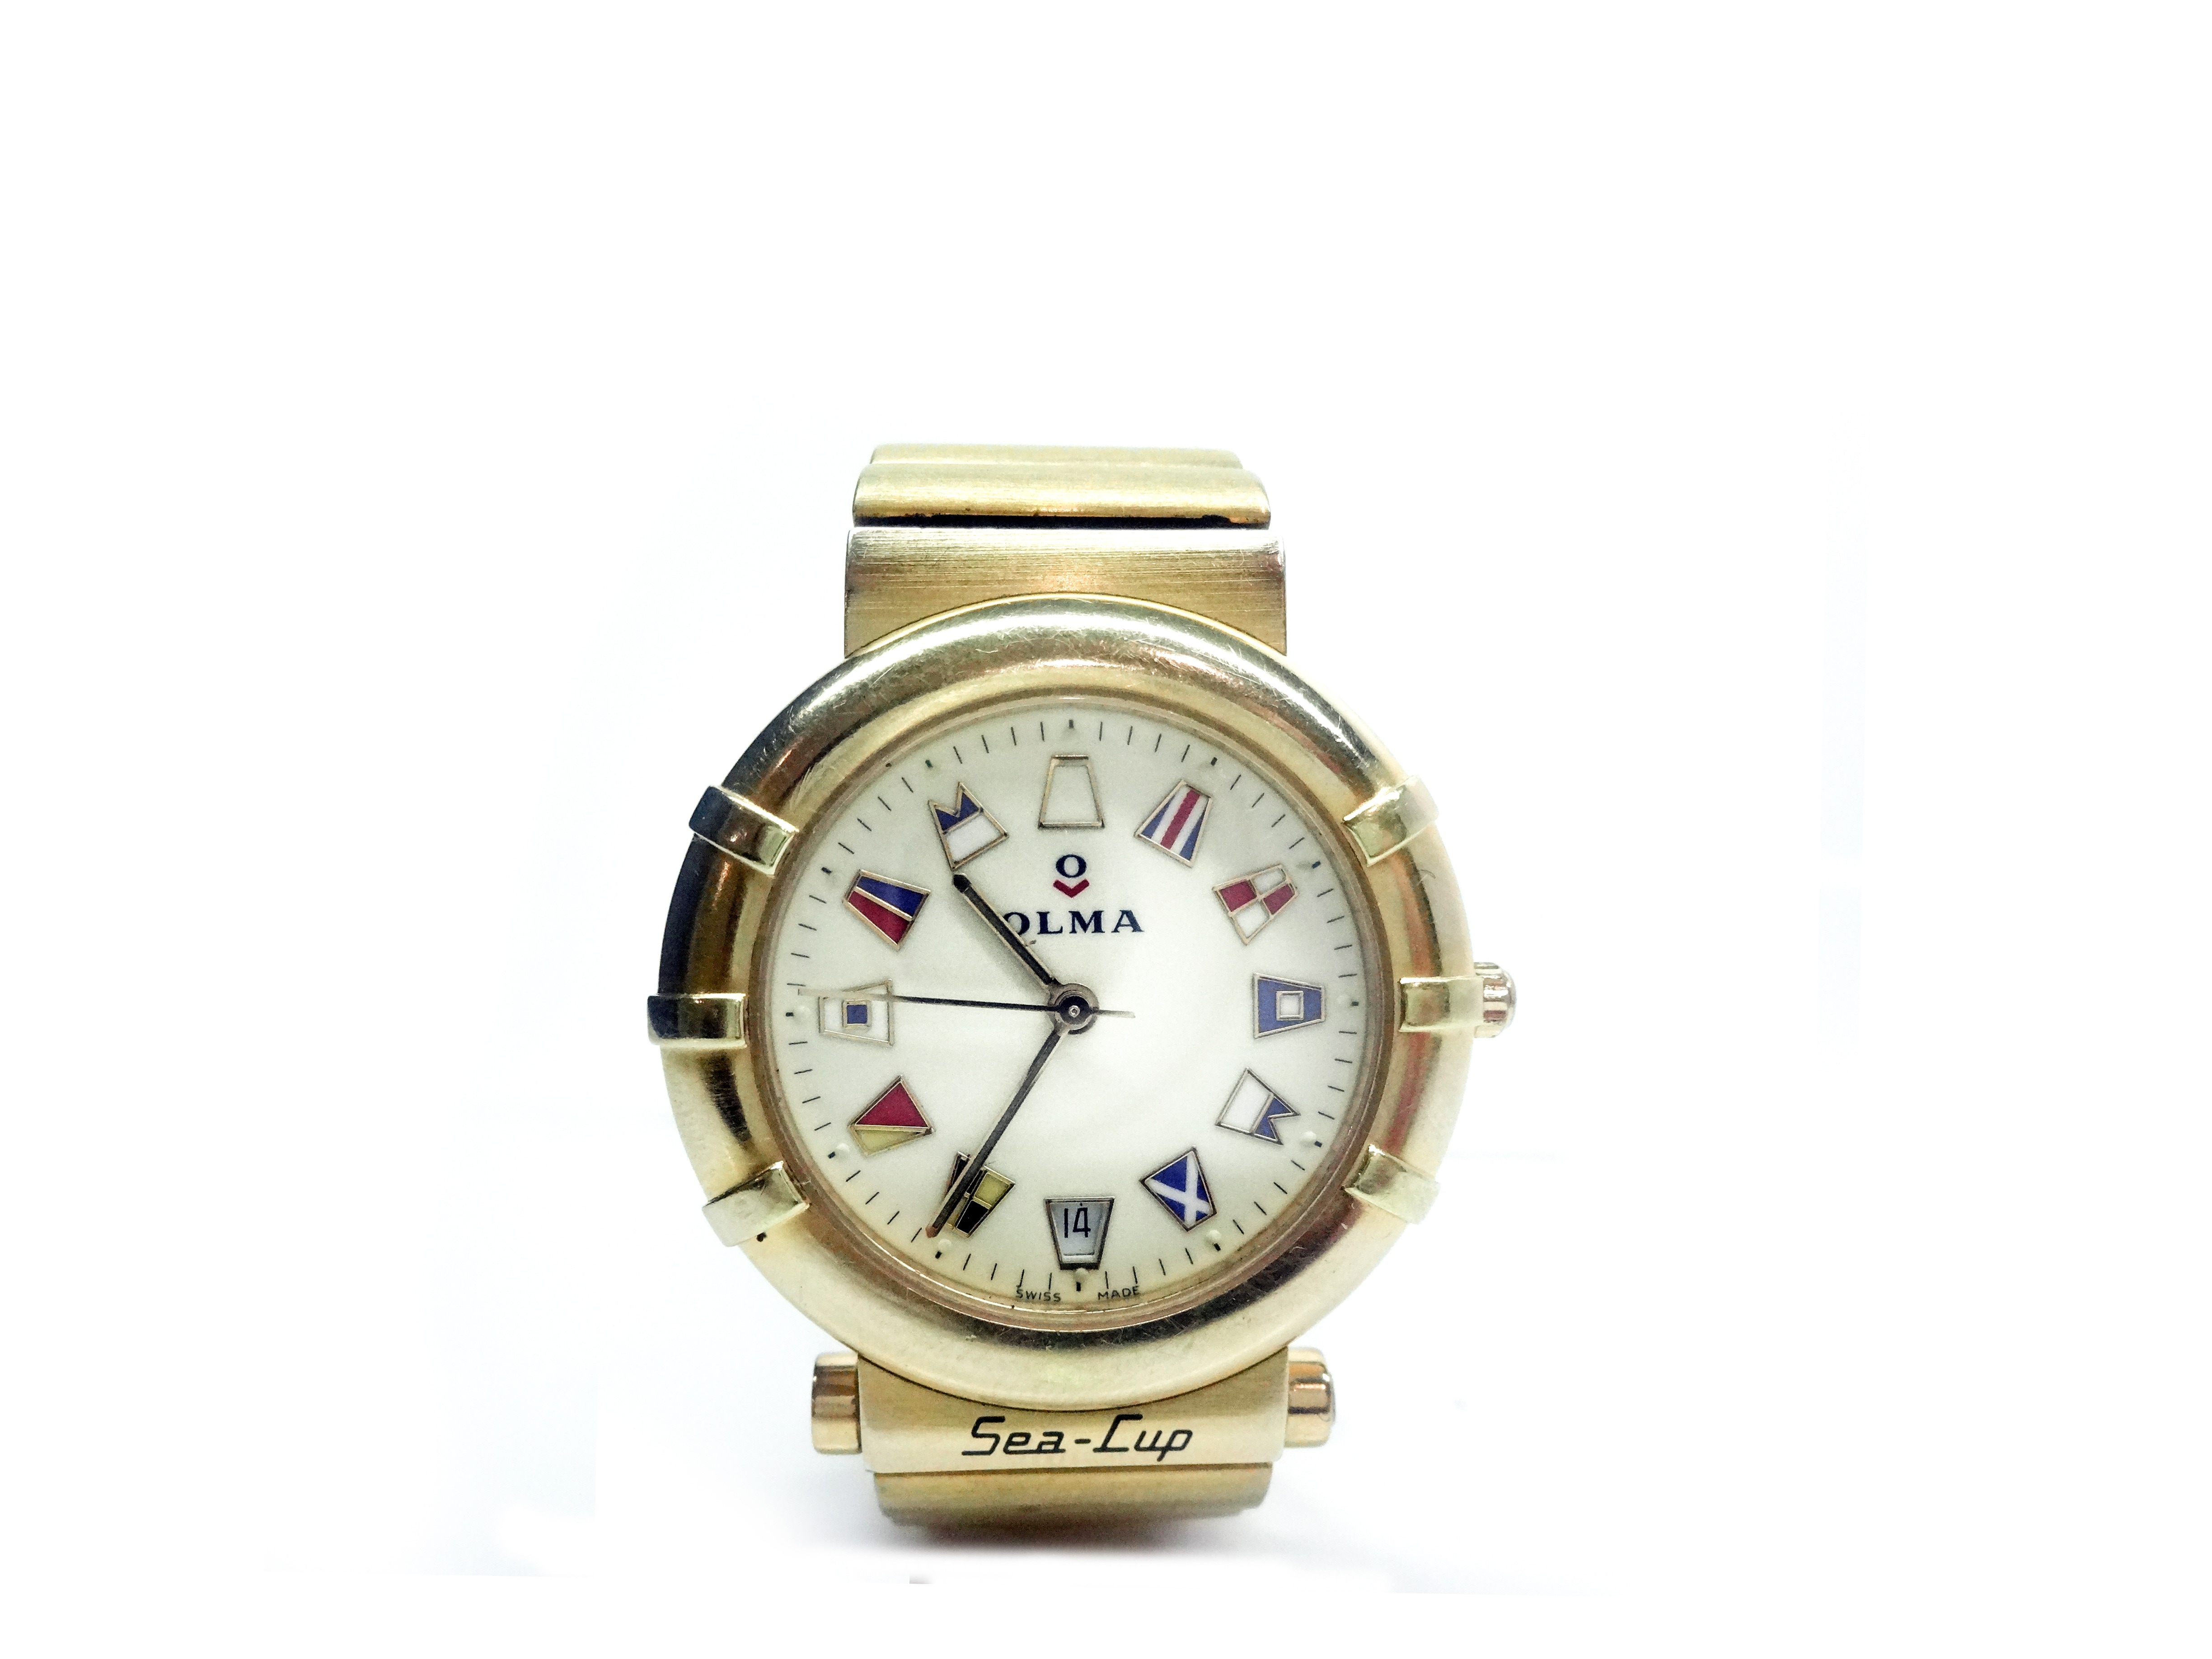 gold chain link white face olma analog watch